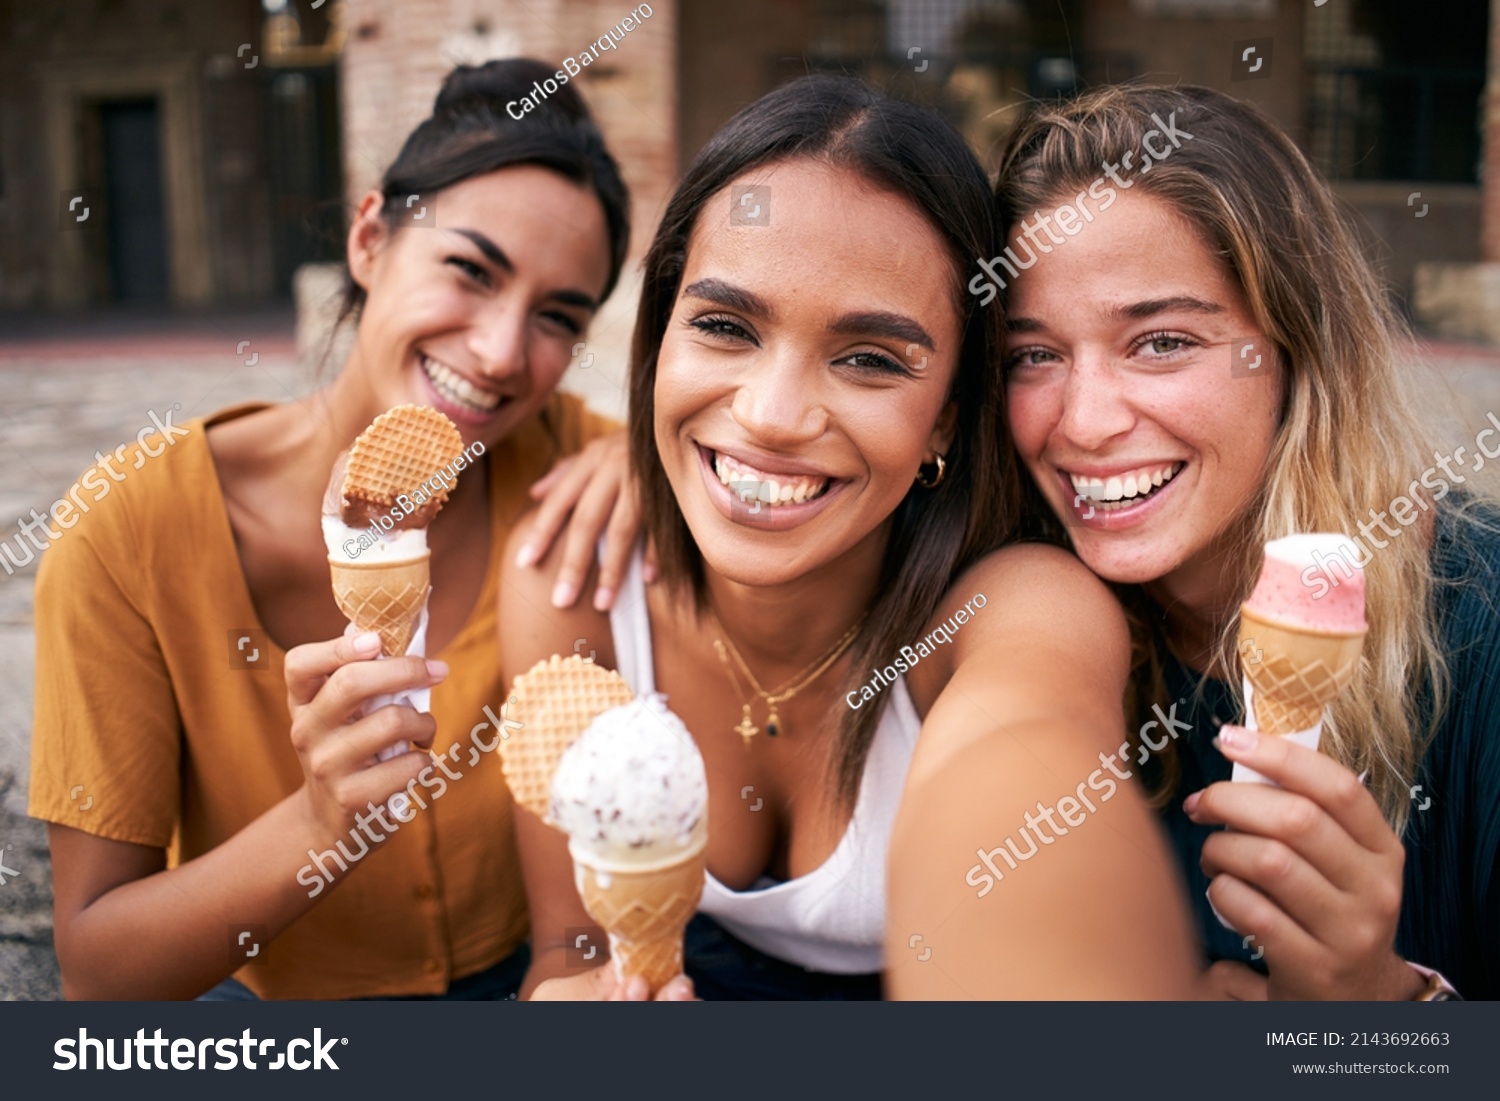 Three young smiling hipster women taking selfie outdoors in summer clothes eating ice cream. Female 20s friends having fun and enjoying summer vibes together. Holiday vacation time #2143692663